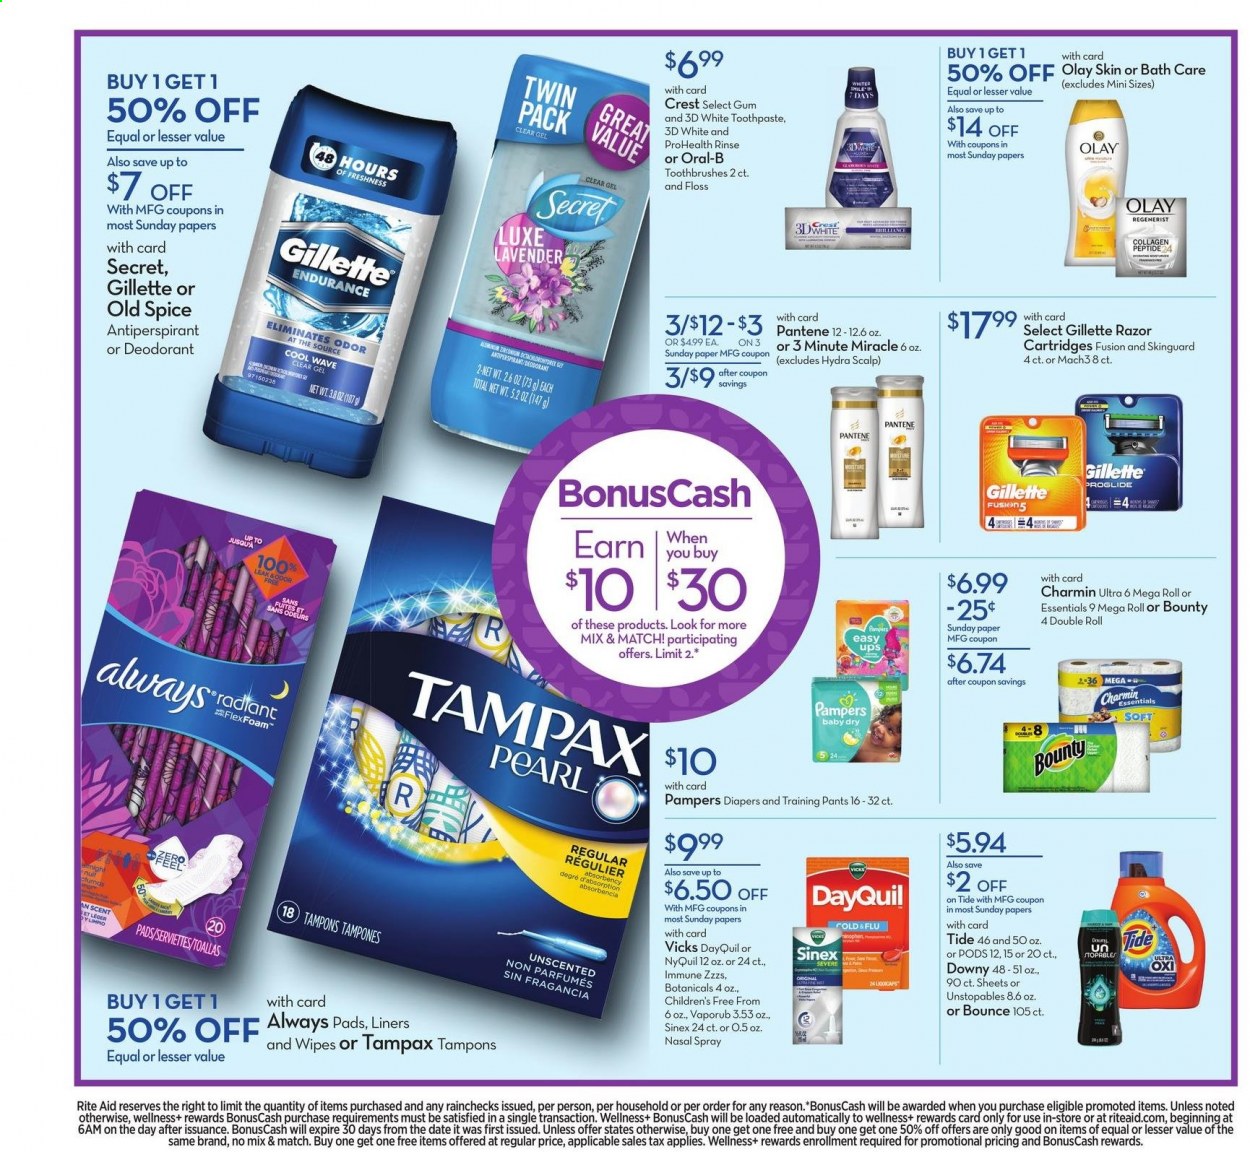 thumbnail - RITE AID Flyer - 02/28/2021 - 03/06/2021 - Sales products - Bounty, Pampers, baby pants, Charmin, wipes, Tide, Unstopables, Bounce, Old Spice, Oral-B, toothpaste, Crest, Tampax, Always pads, tampons, Olay, Pantene, anti-perspirant, deodorant, Gillette, Vicks, DayQuil, NyQuil, VapoRub, nasal spray, Sinex. Page 3.